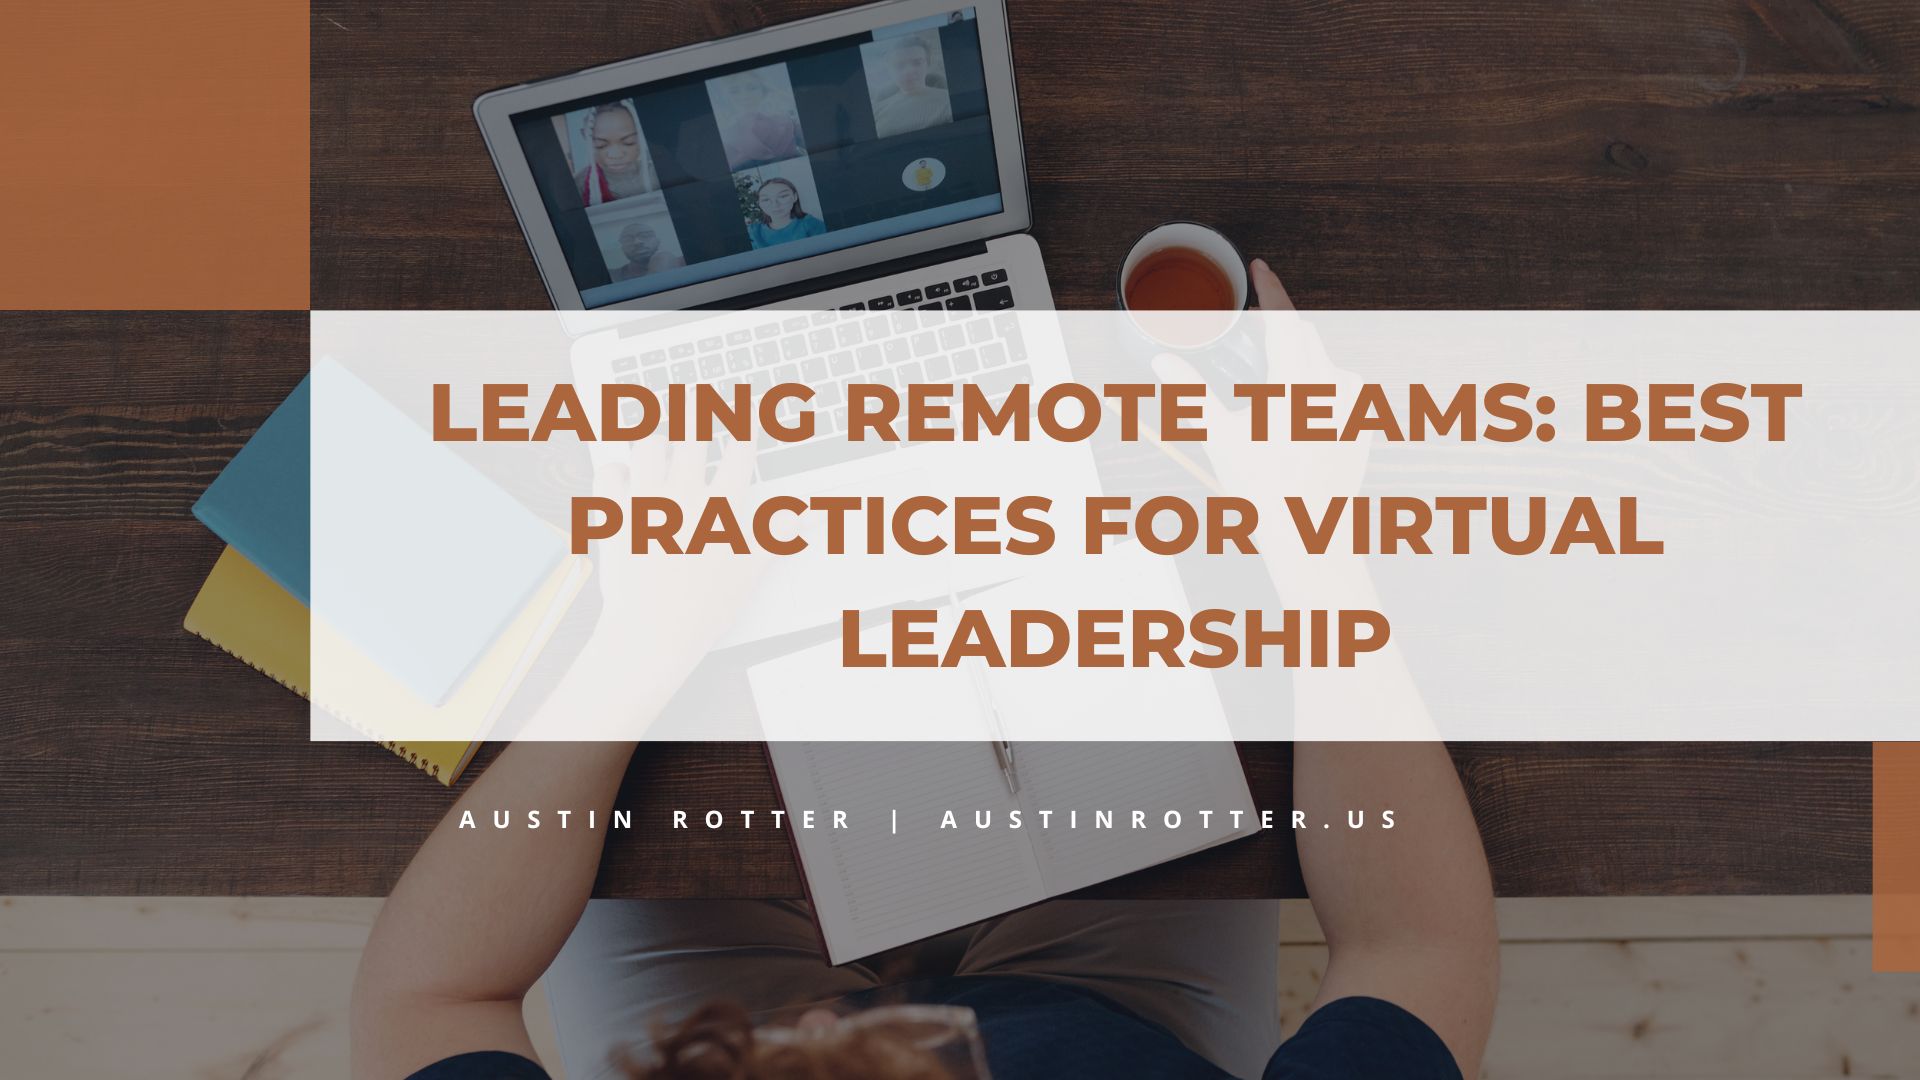 LEADING REMOTE TEAMS: BEST
PRACTICES FOR VIRTUAL

LEADERSHIP

 

AUSTIN ROTTER | AUSTINROTTER.US